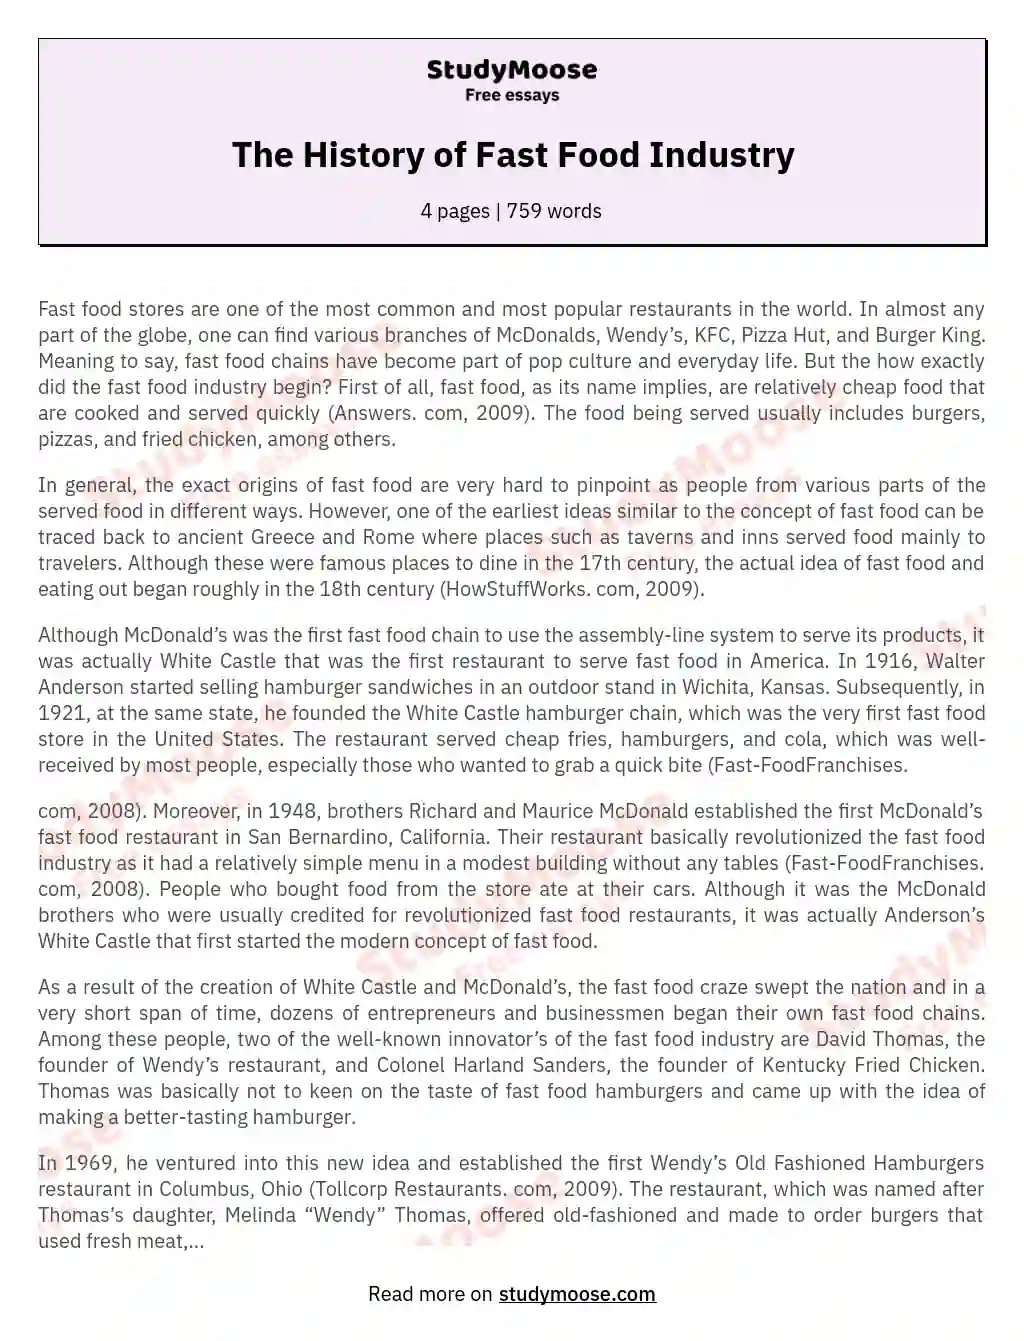 The History of Fast Food Industry essay